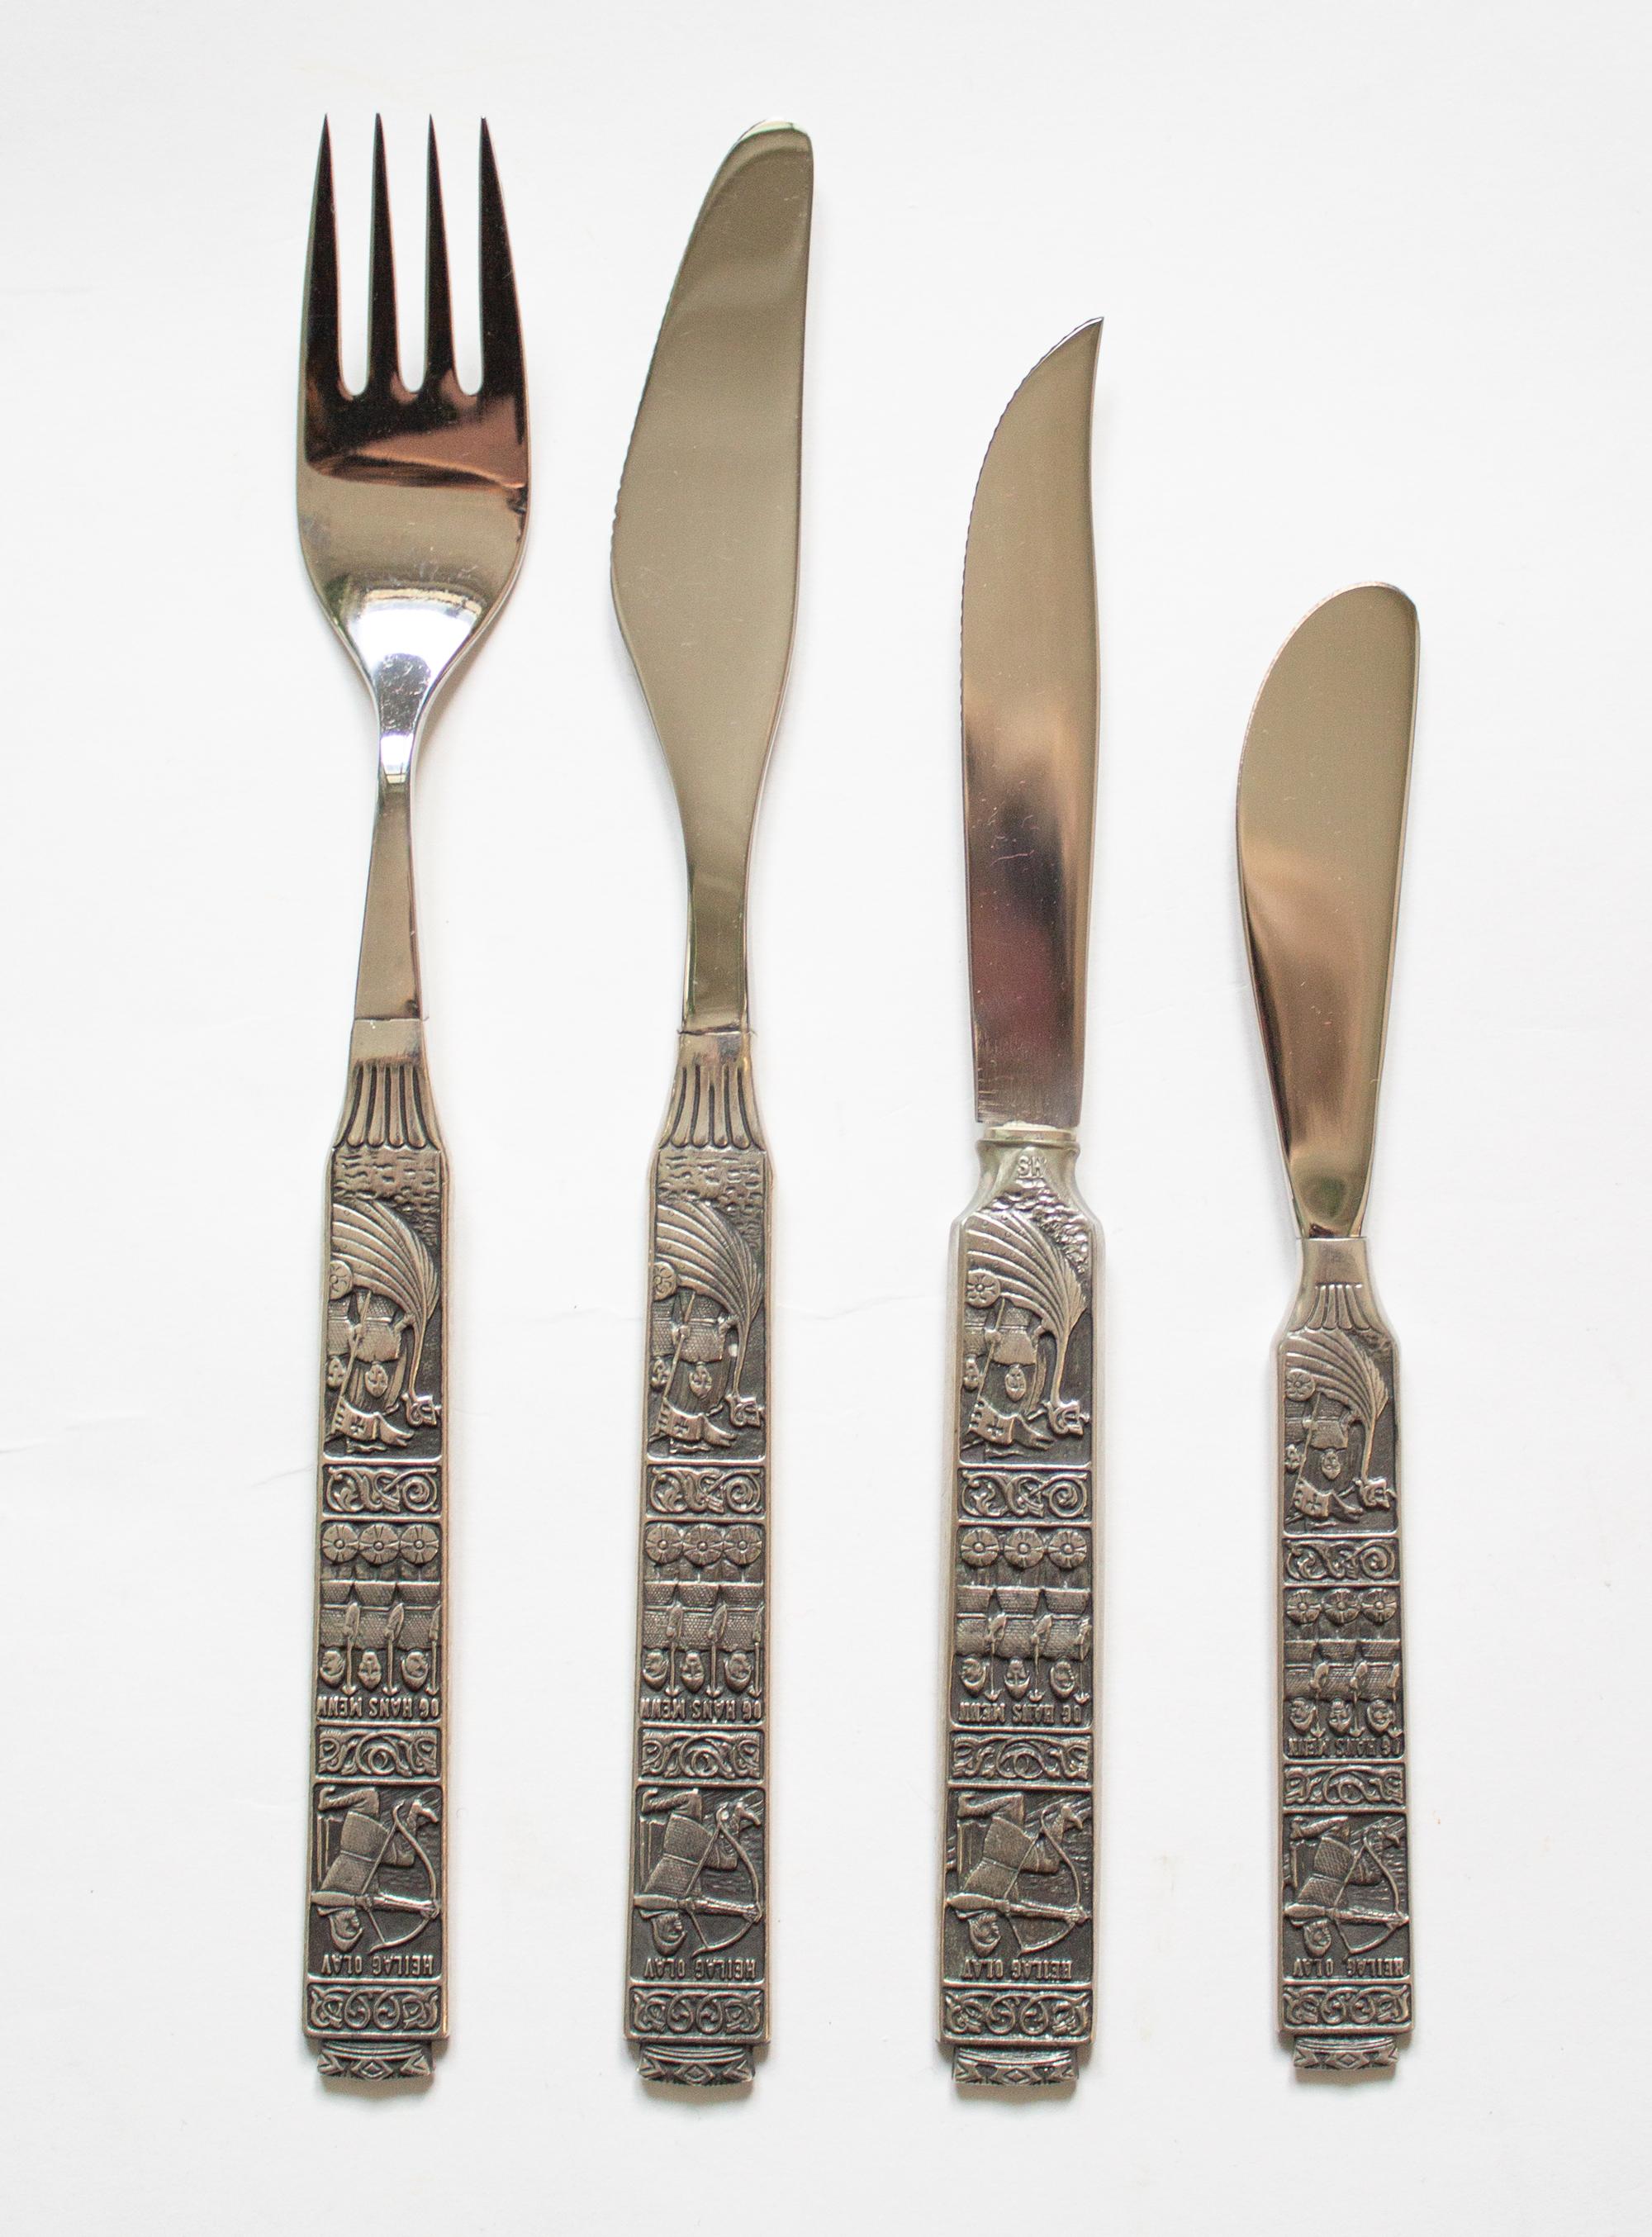 Beautiful and rare new set including 98 pieces total. Stainless steel with pewter handle, a very nice and clean condition highly collectible. Beautiful motif pattern with a tribute to the Viking king Olaf made in Norway.

12 teaspoons
12 starter